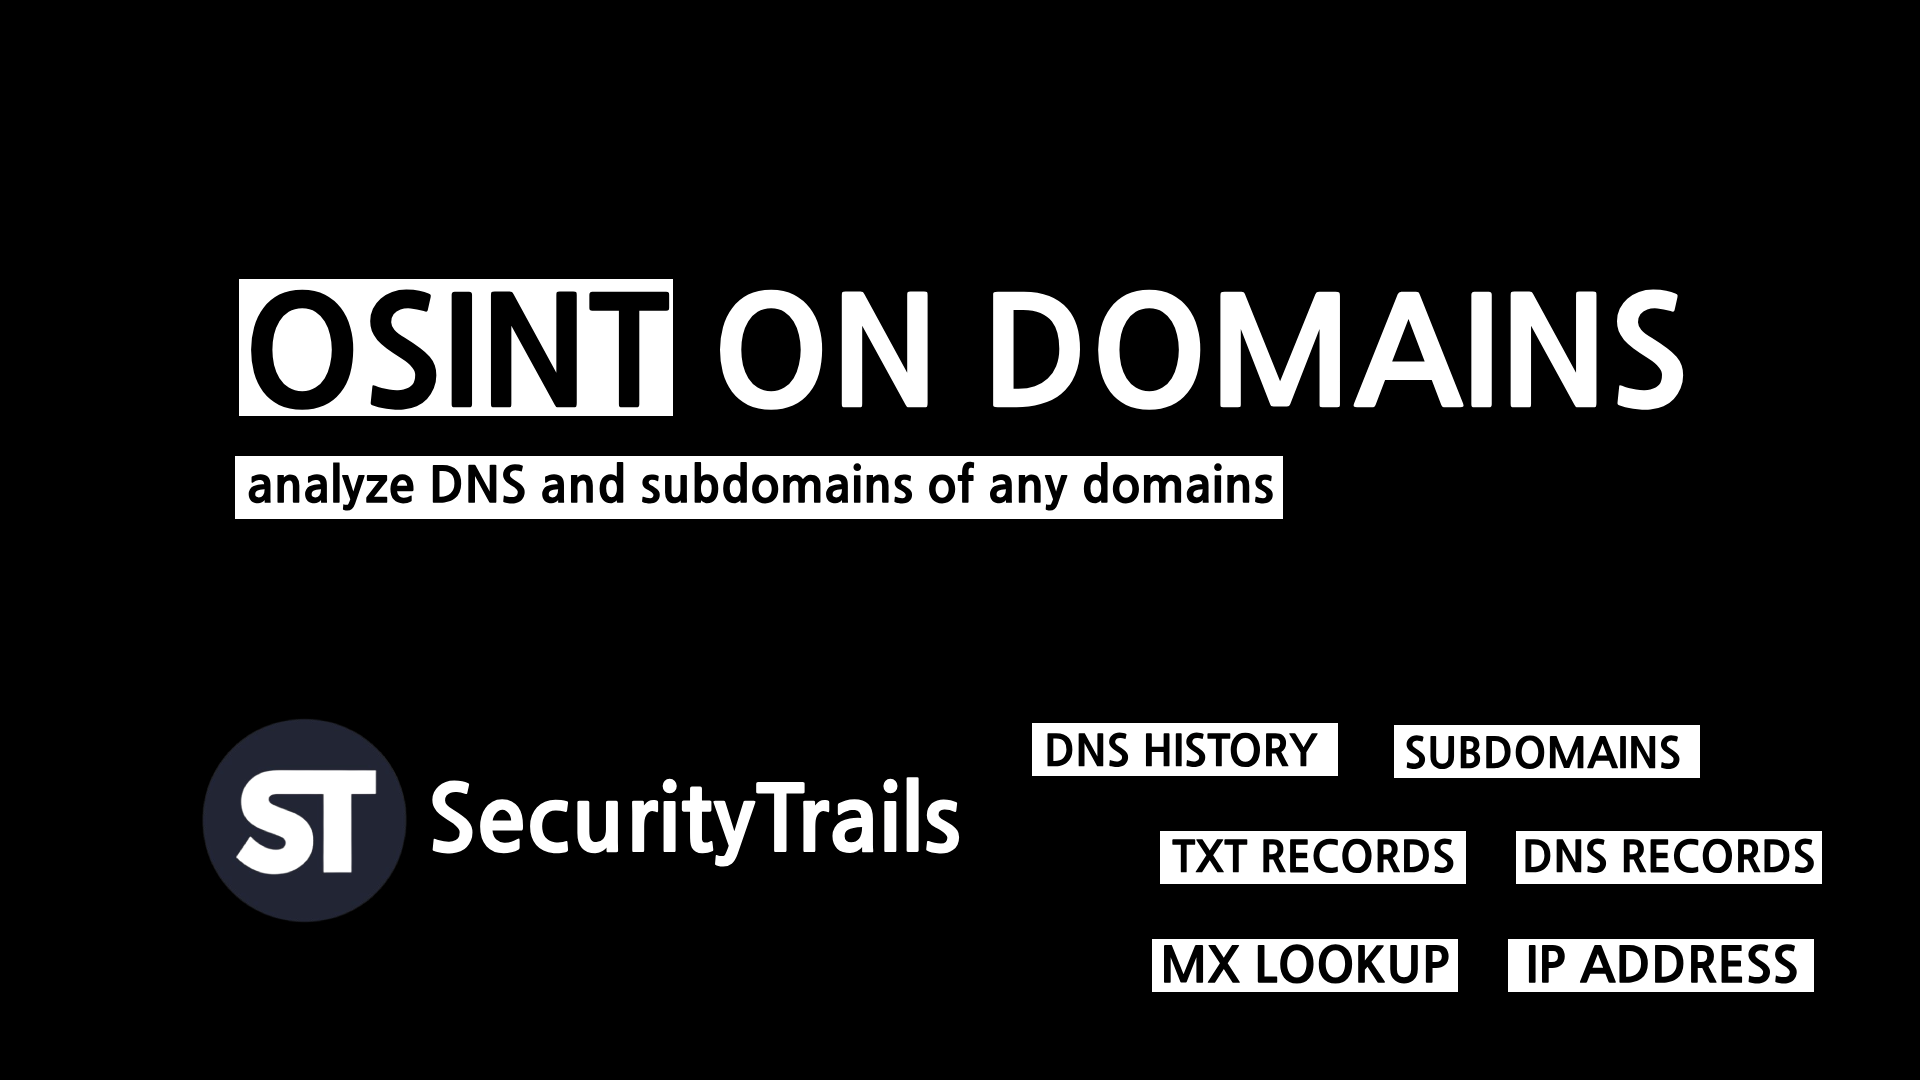 analyze DNS and subdomains of any domain and website